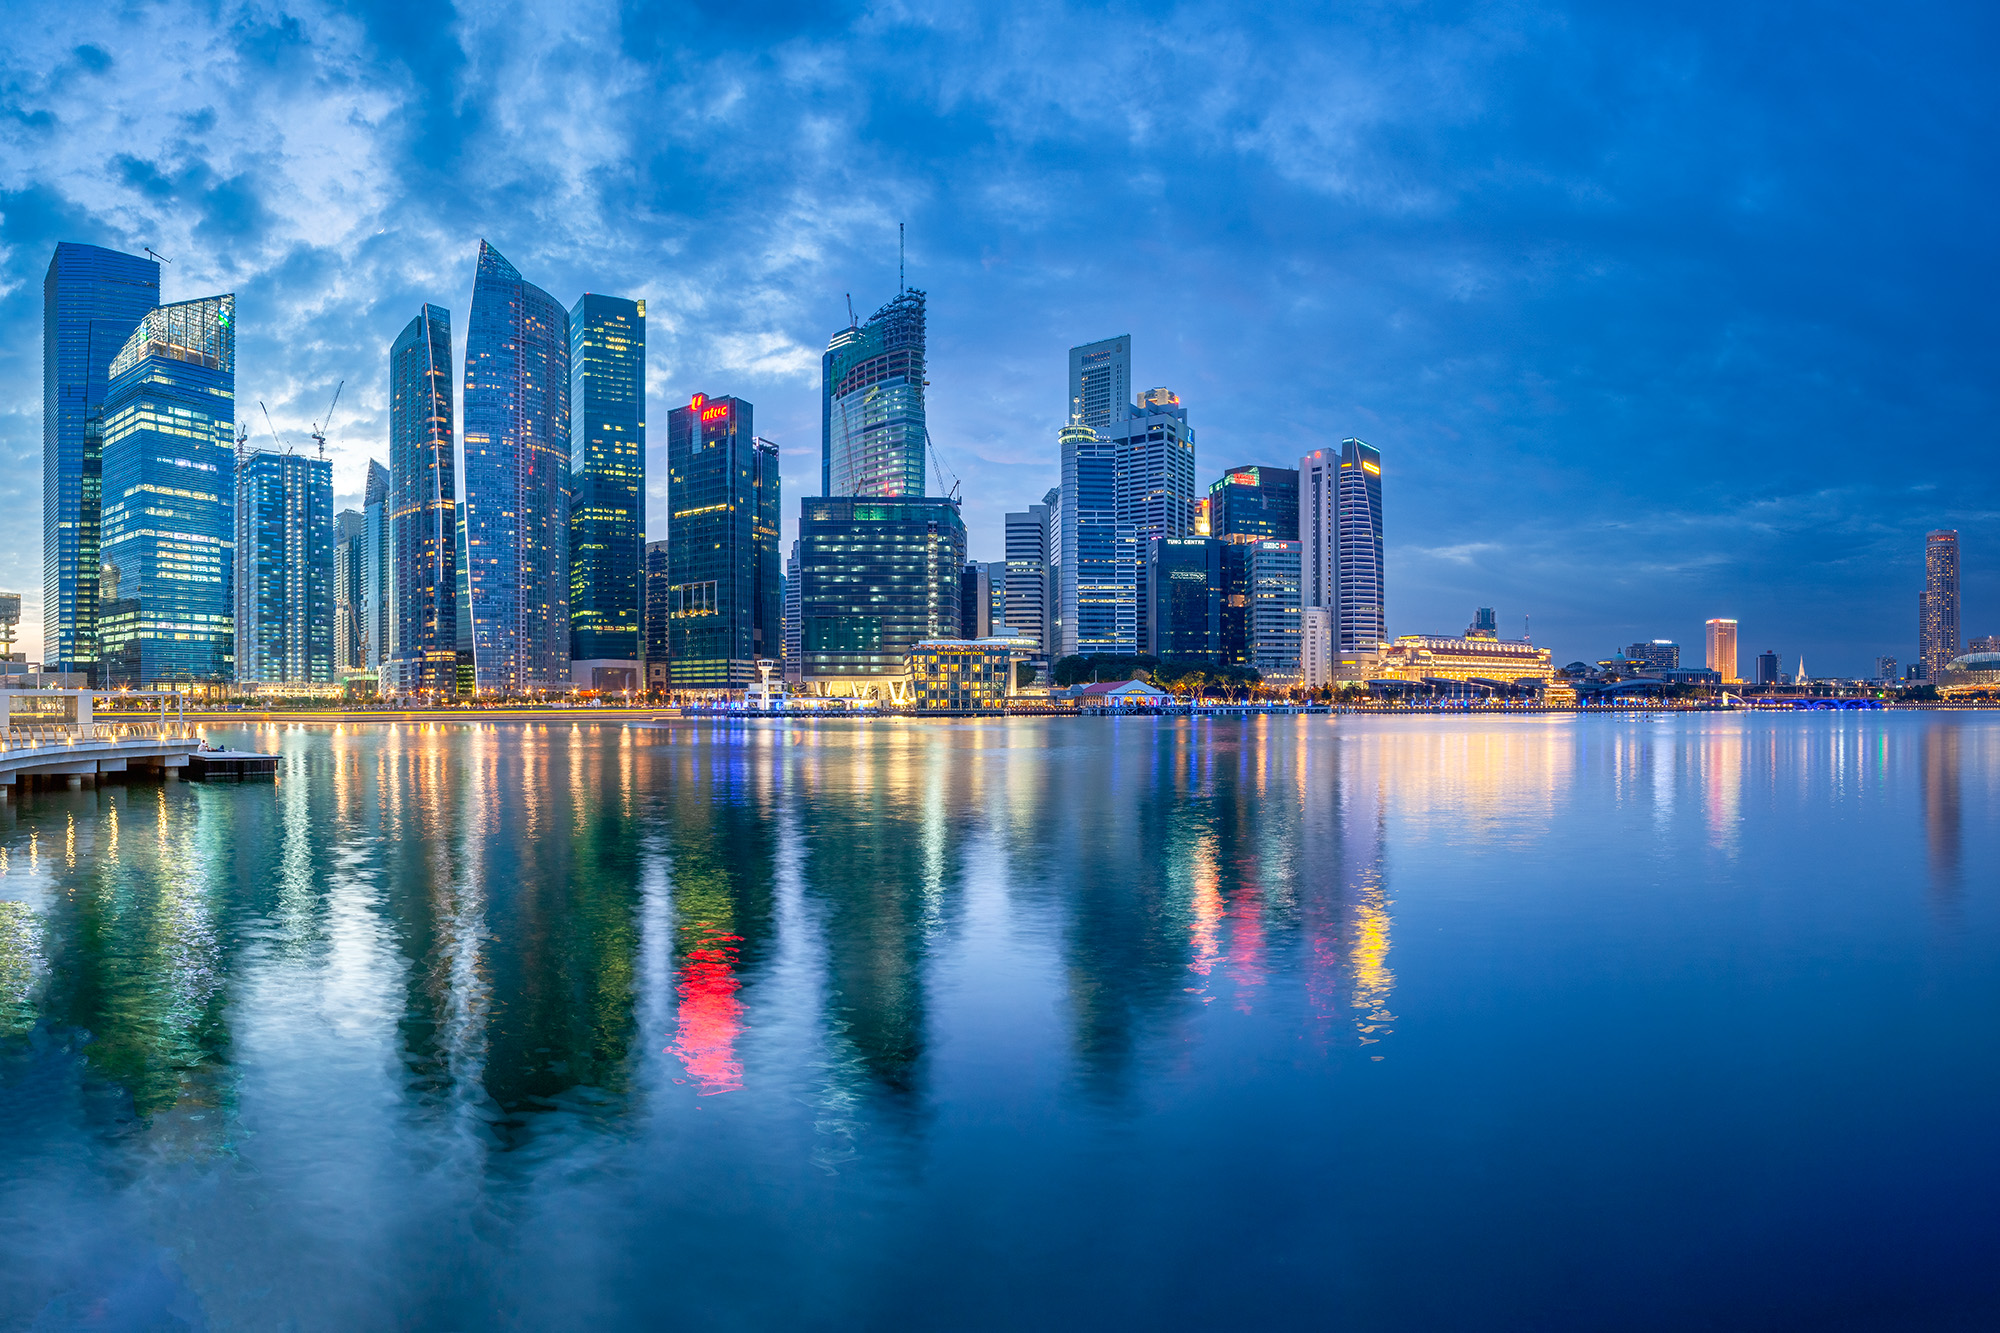 This image, captured during the enchanting blue hour, frames the dynamic Singapore Harbor. It showcases the city's skyscrapers...